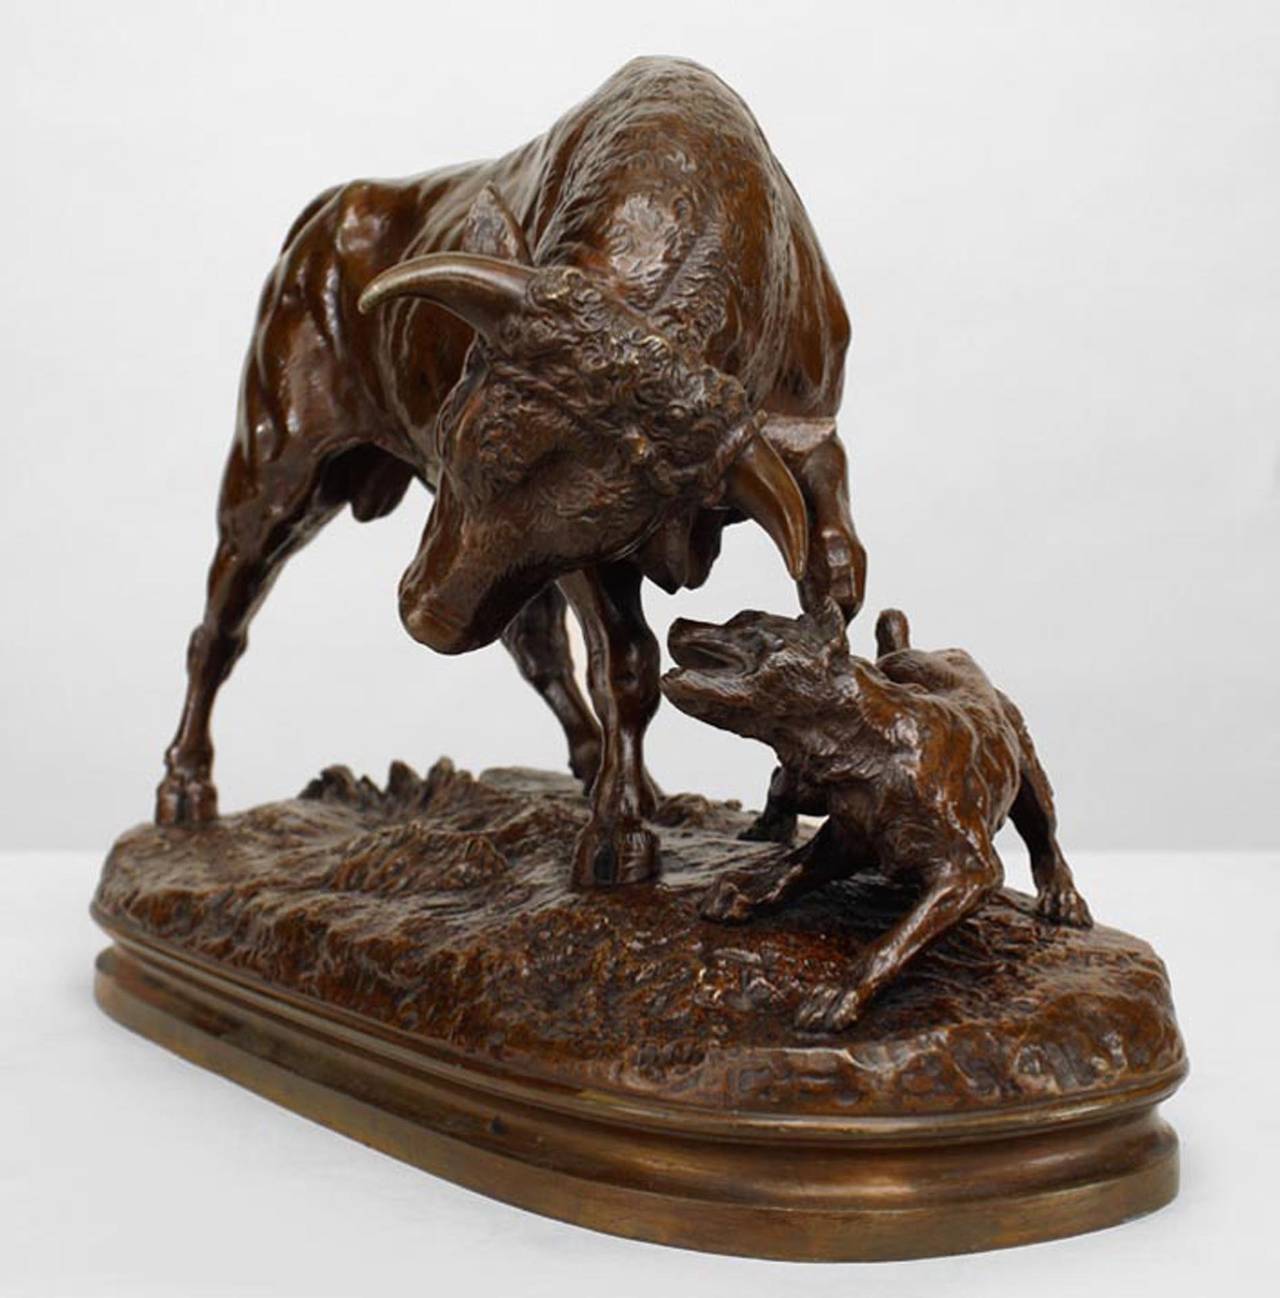 French bronze figure of bull with attacking dog on an oval base (signed alton),
19th or 20th century.